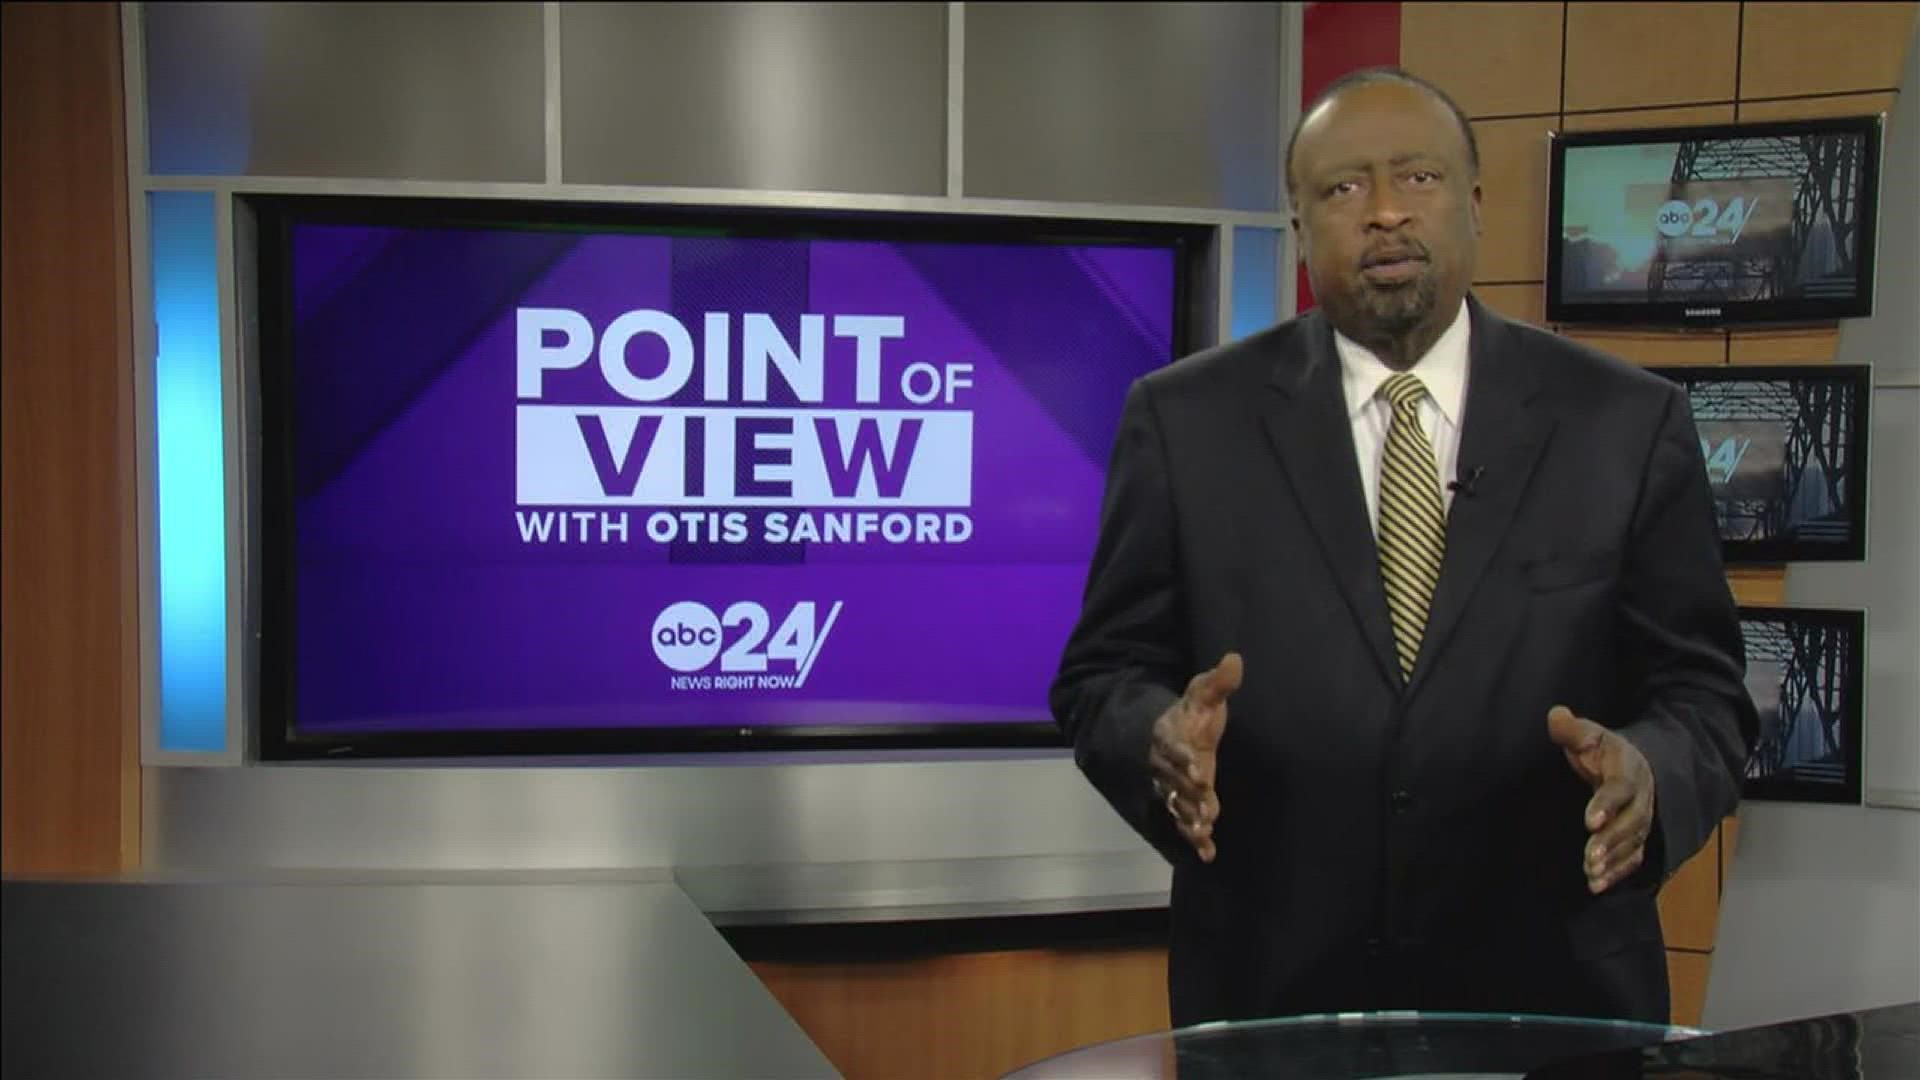 ABC 24 political analyst and commentator Otis Sanford shared his point of view on the river cruise industry in Memphis.